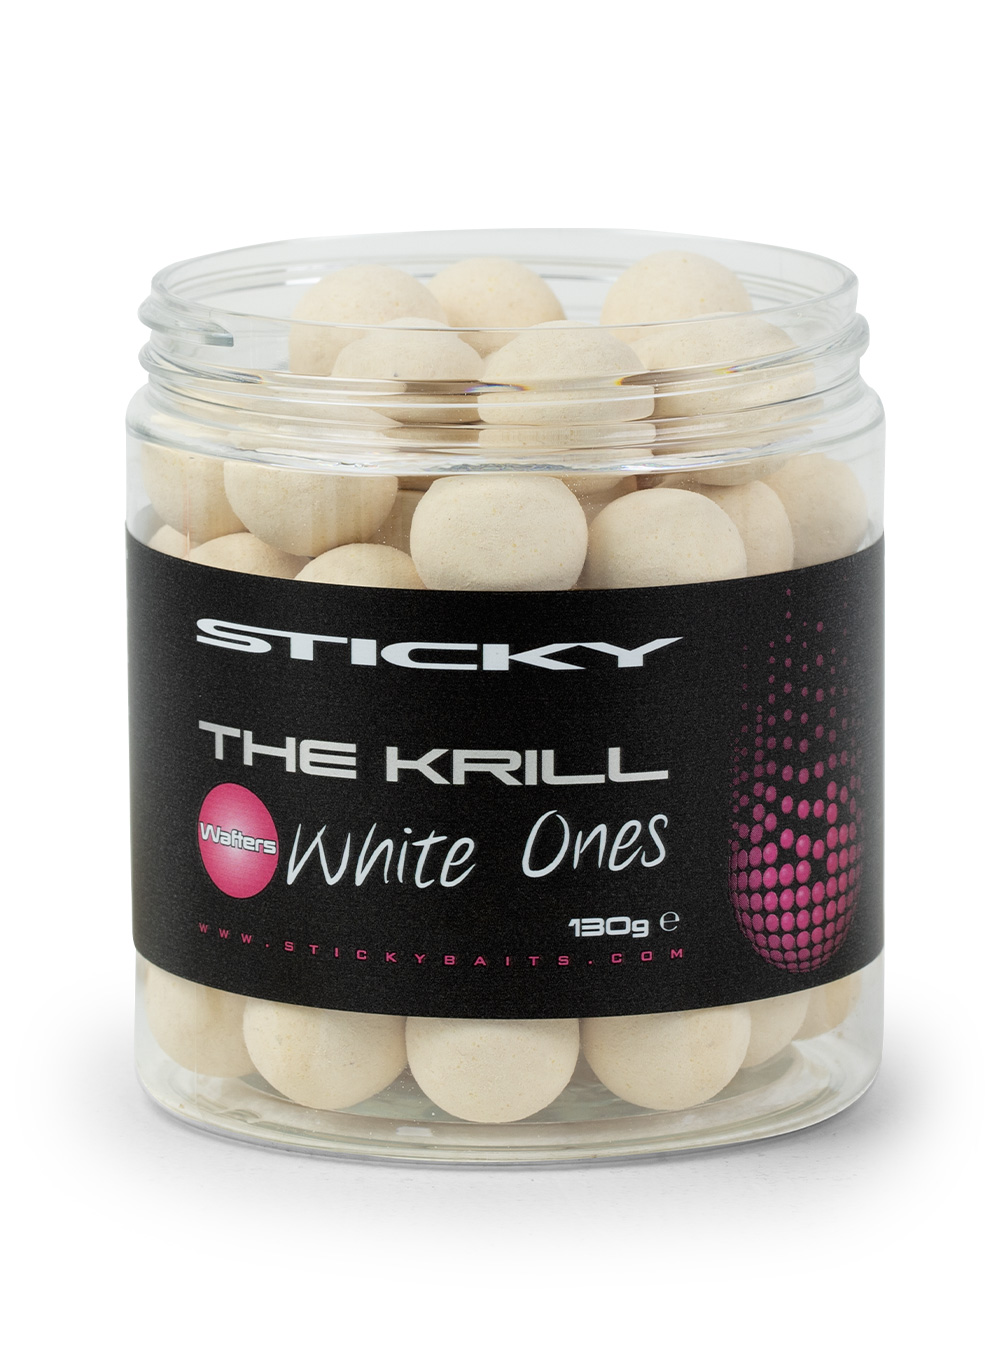 Sticky Baits The Krill 'White ones' pop-ups